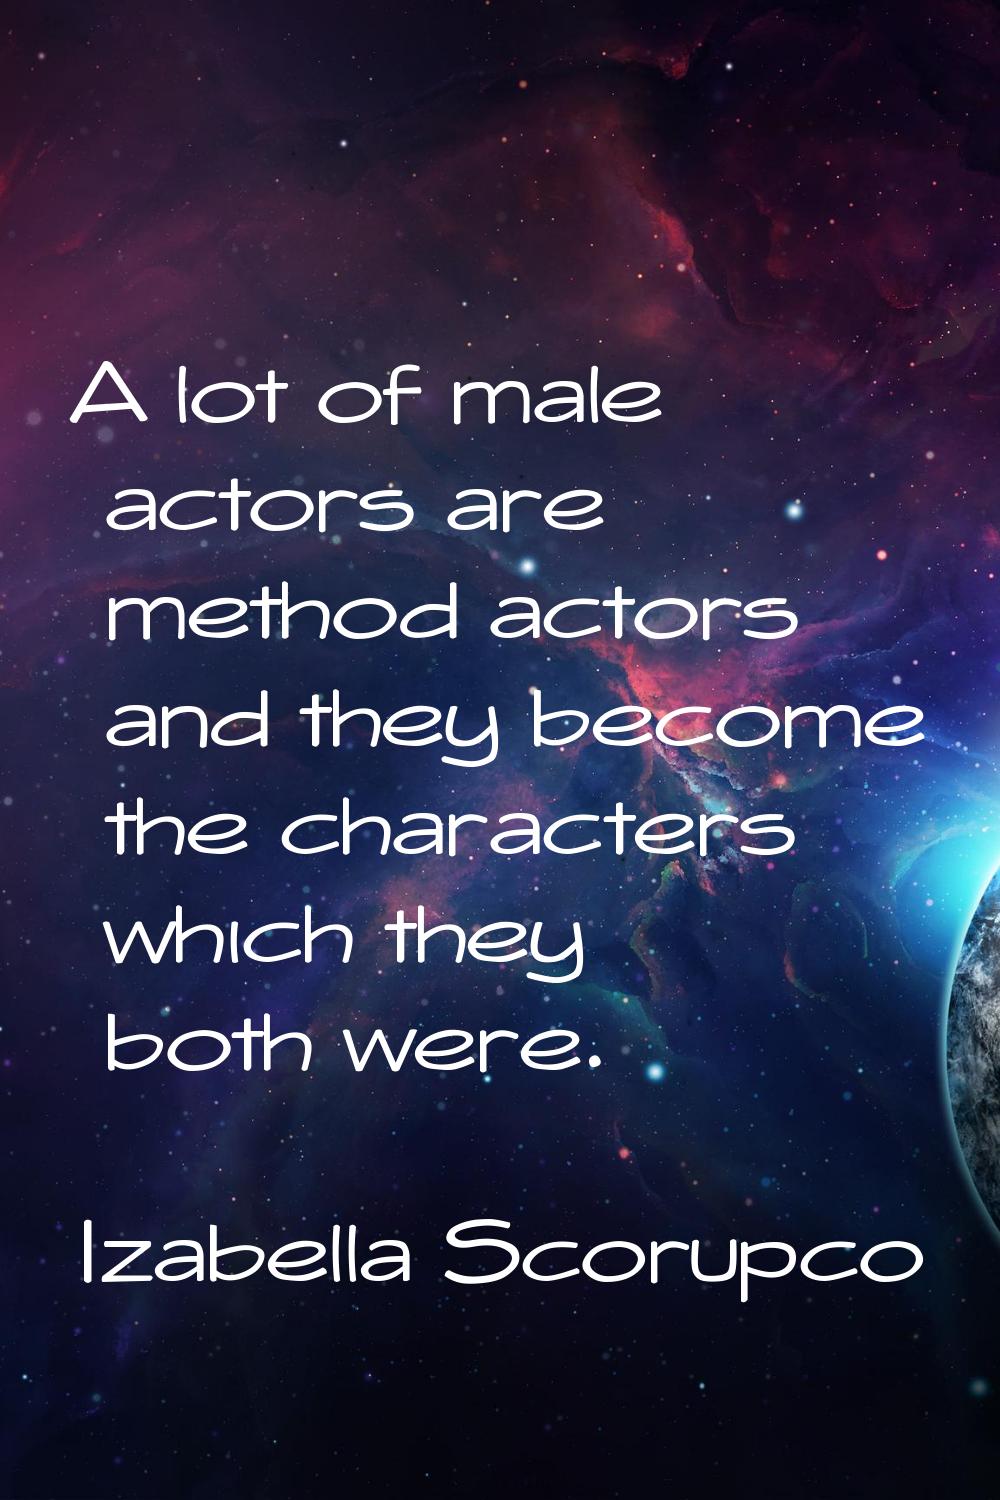 A lot of male actors are method actors and they become the characters which they both were.